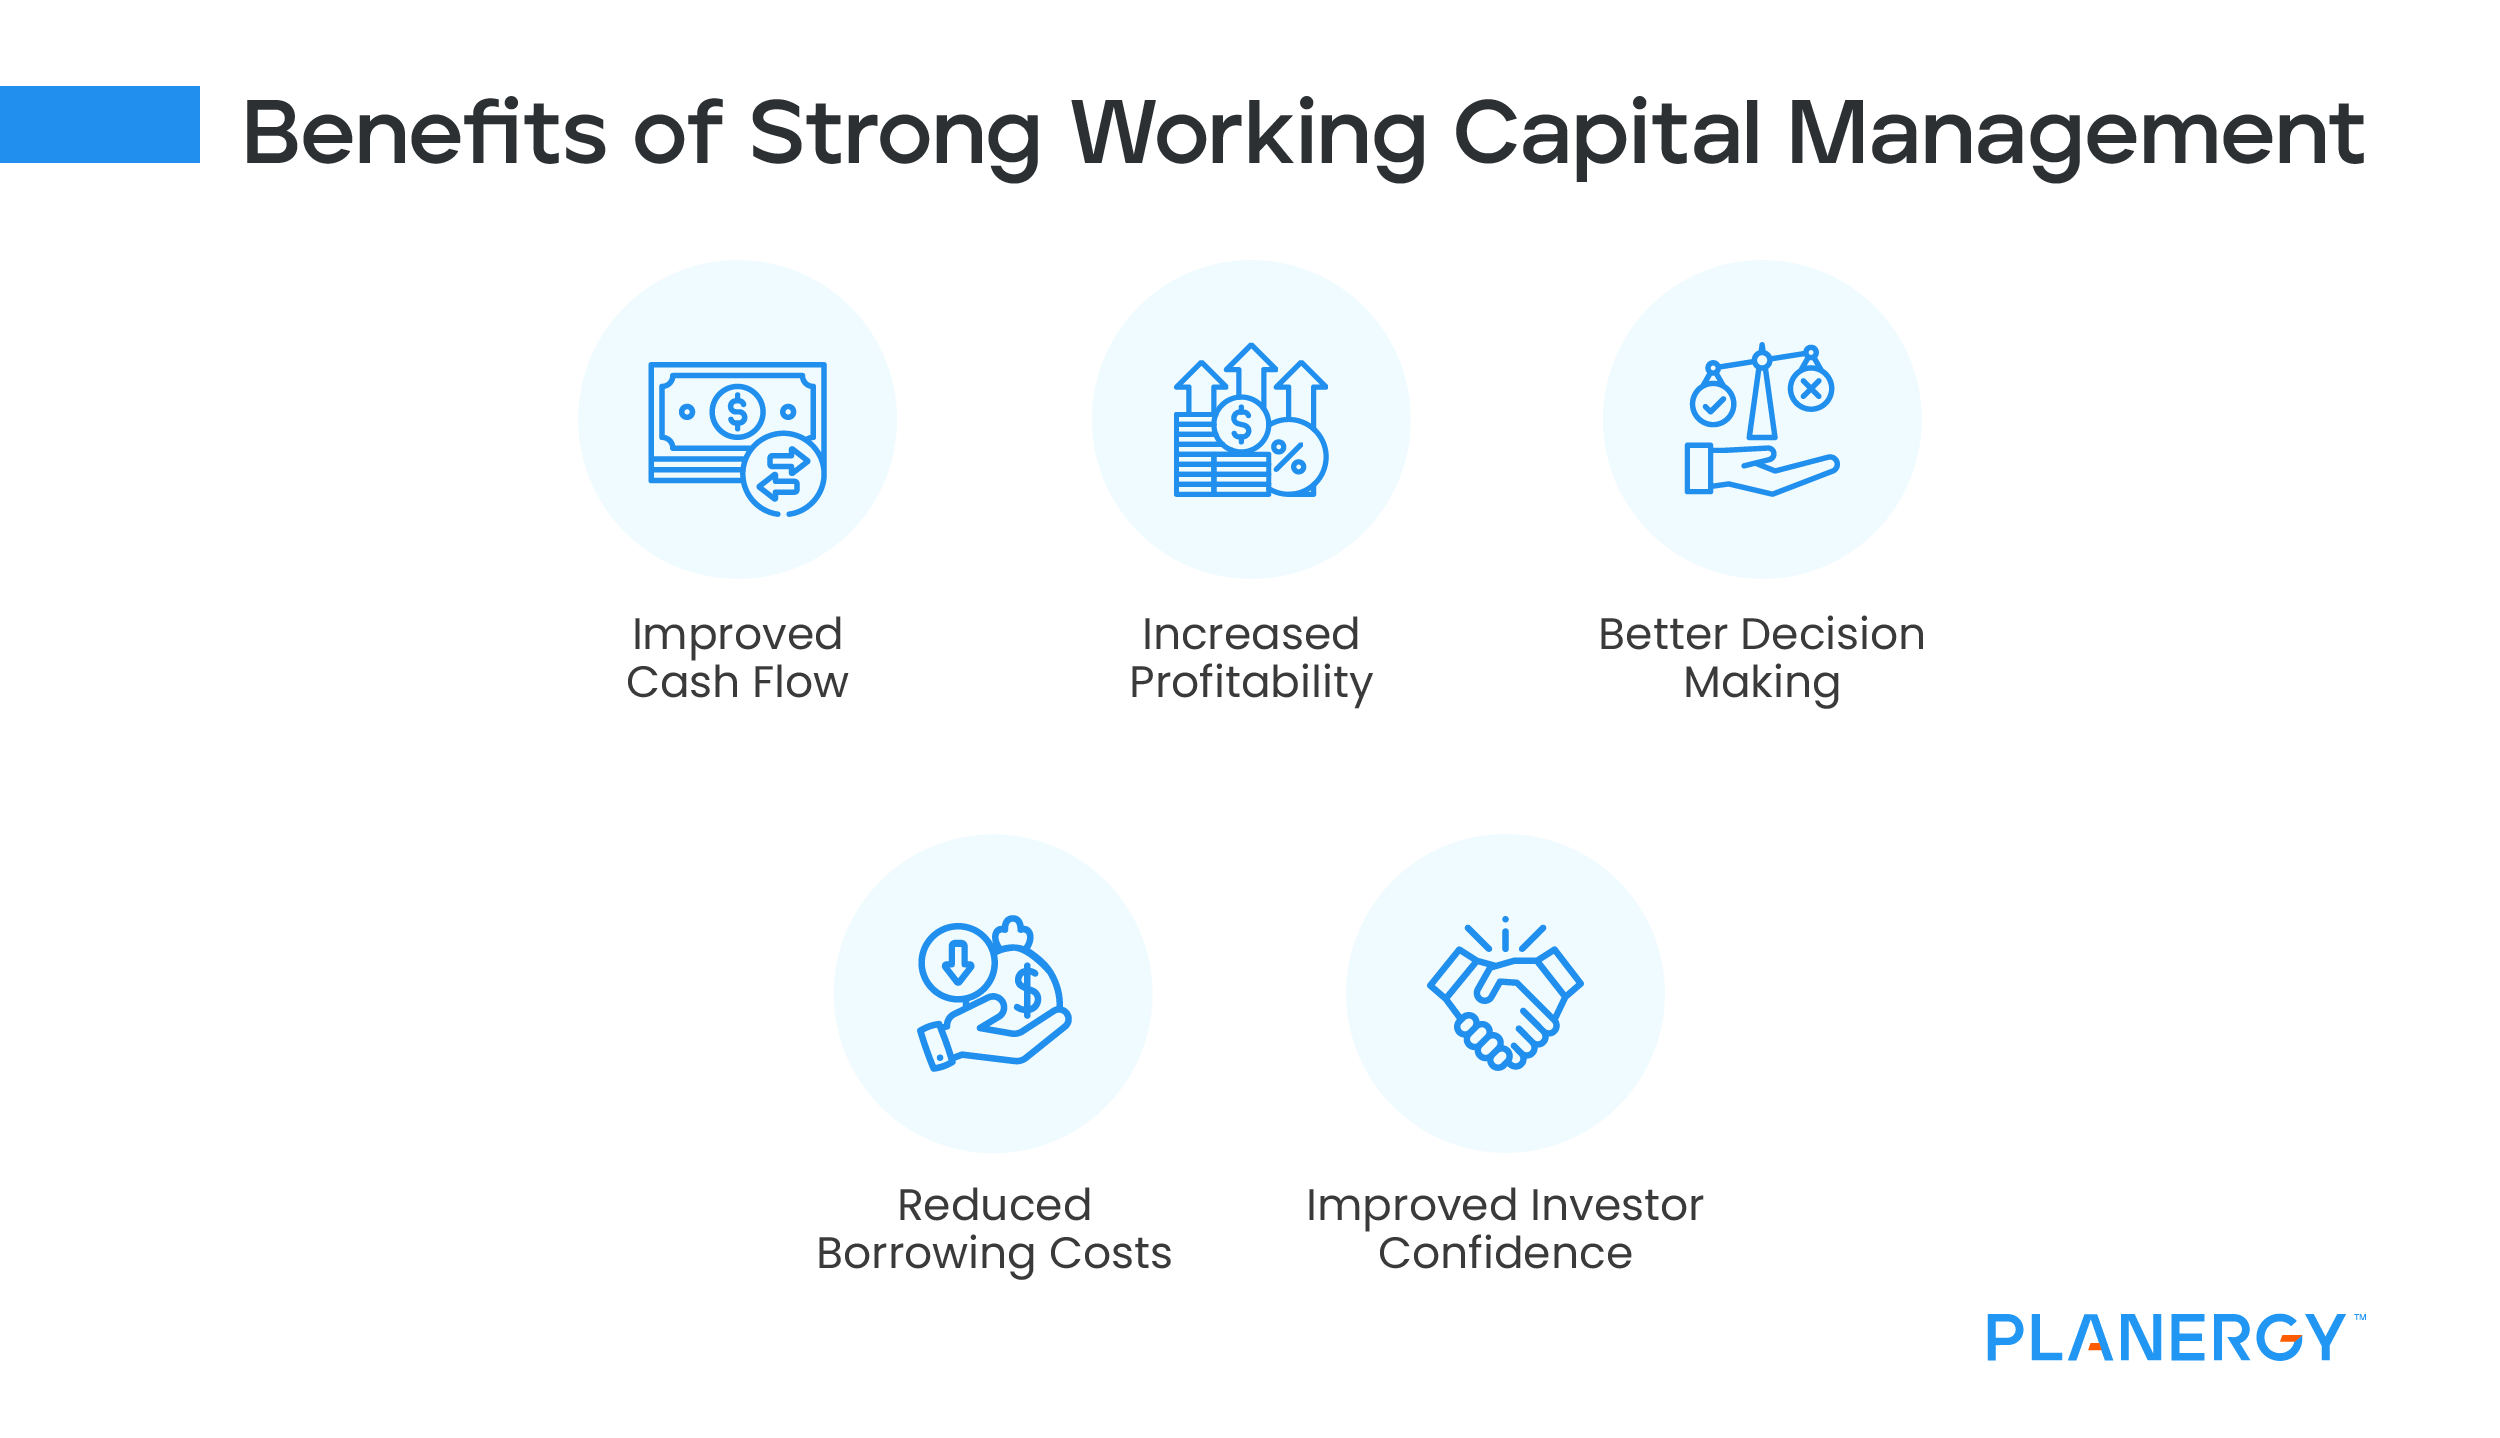 Benefits of Strong Working Capital Management